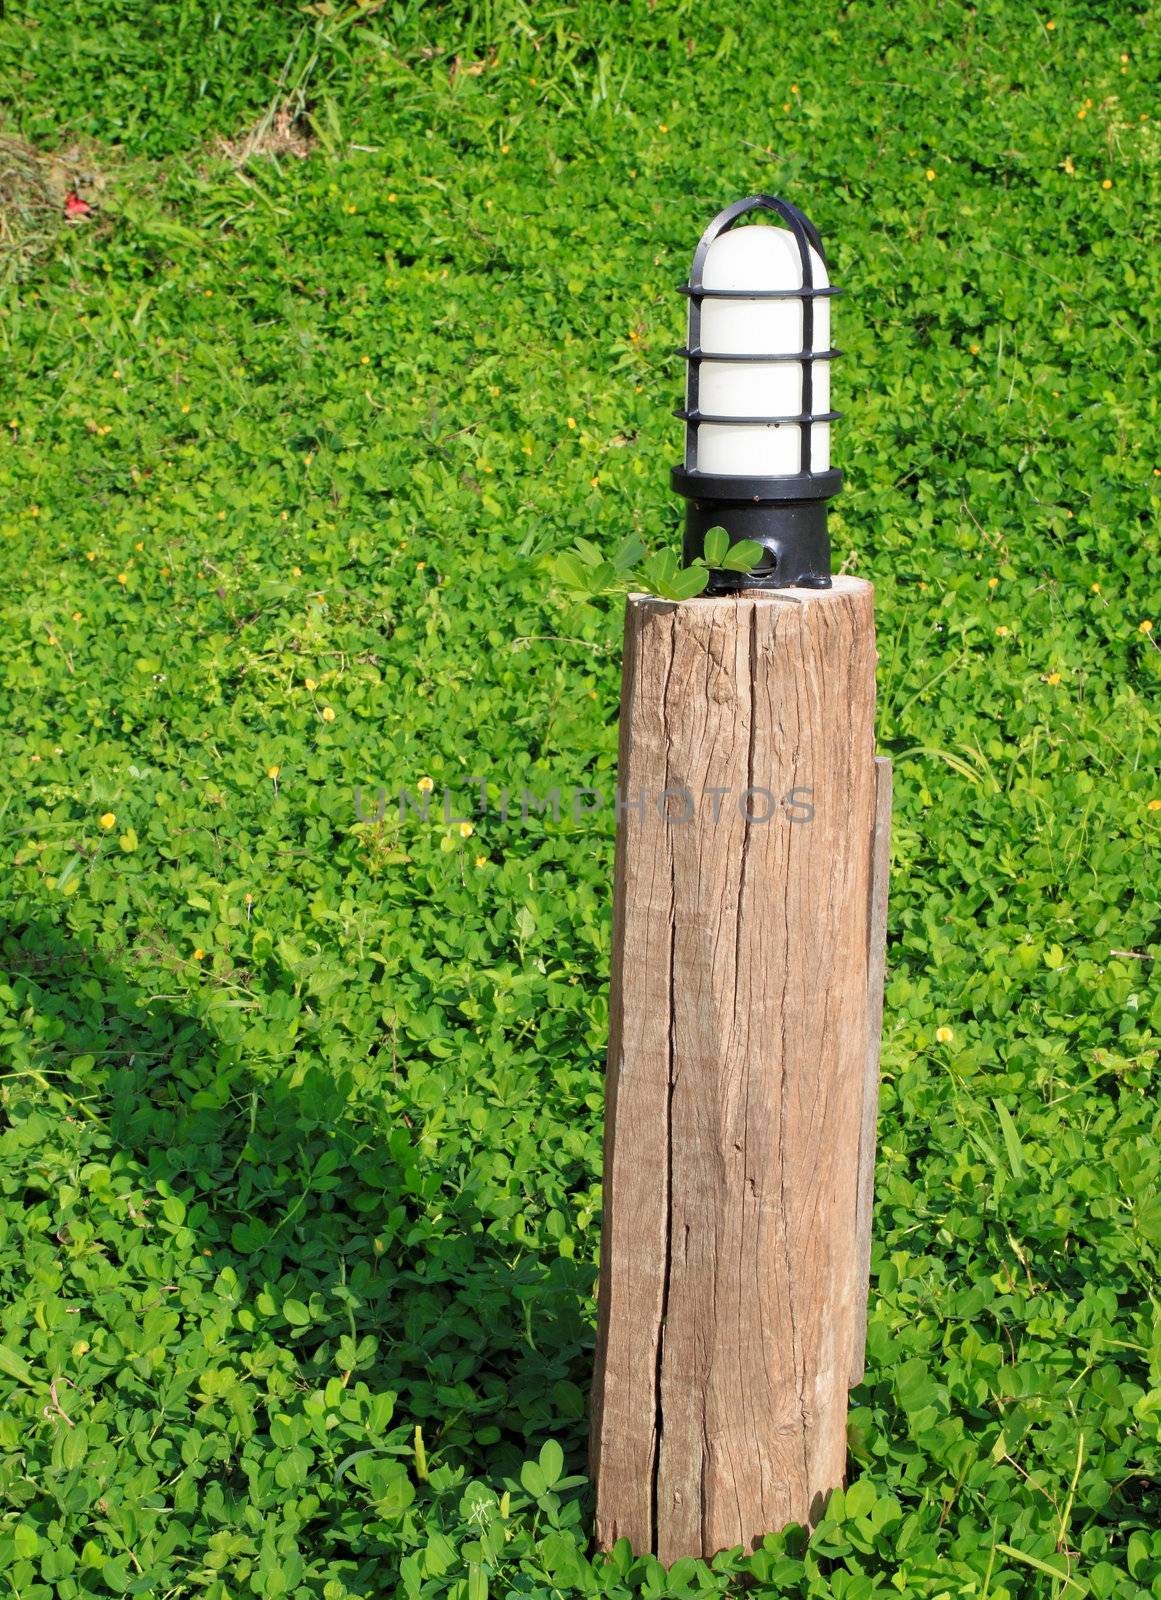 garden lamp on the background of green grass